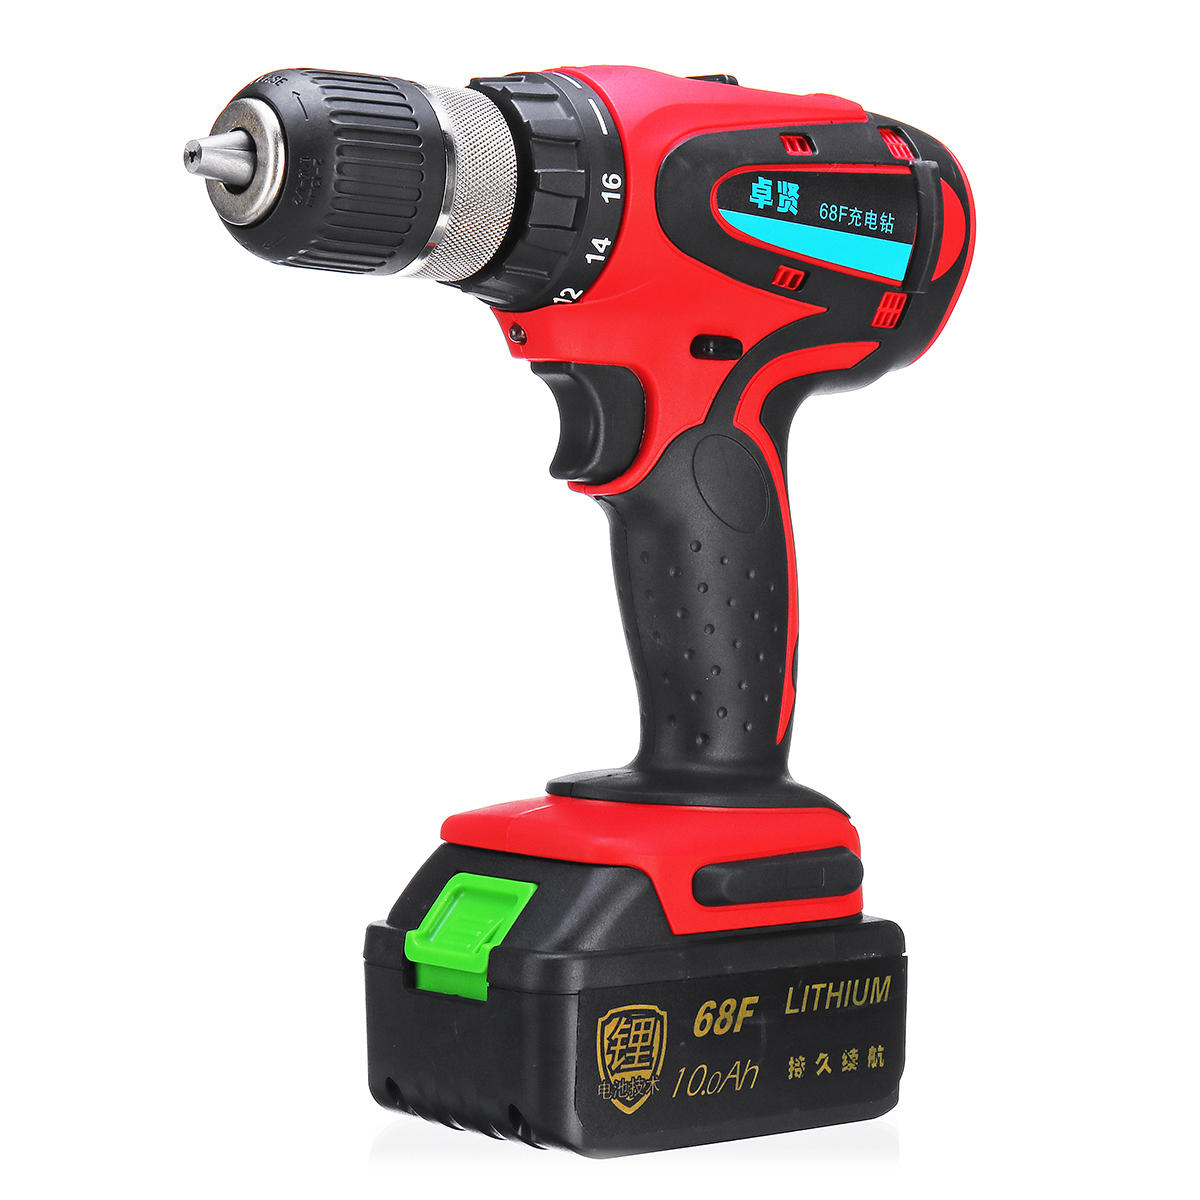 68v 10ah cordless rechargeable electric drill 2 speed ...